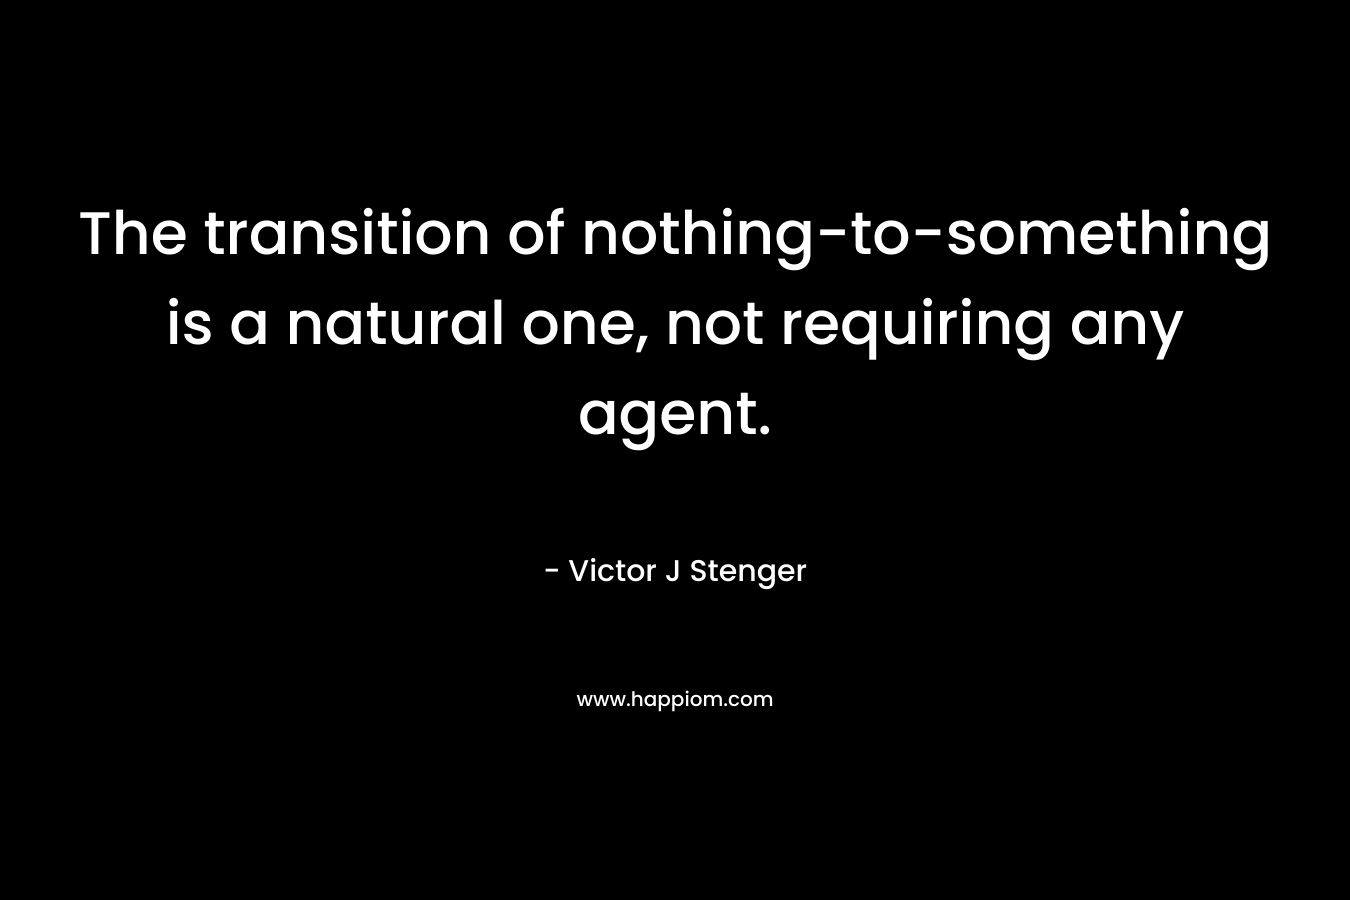 The transition of nothing-to-something is a natural one, not requiring any agent. – Victor J Stenger